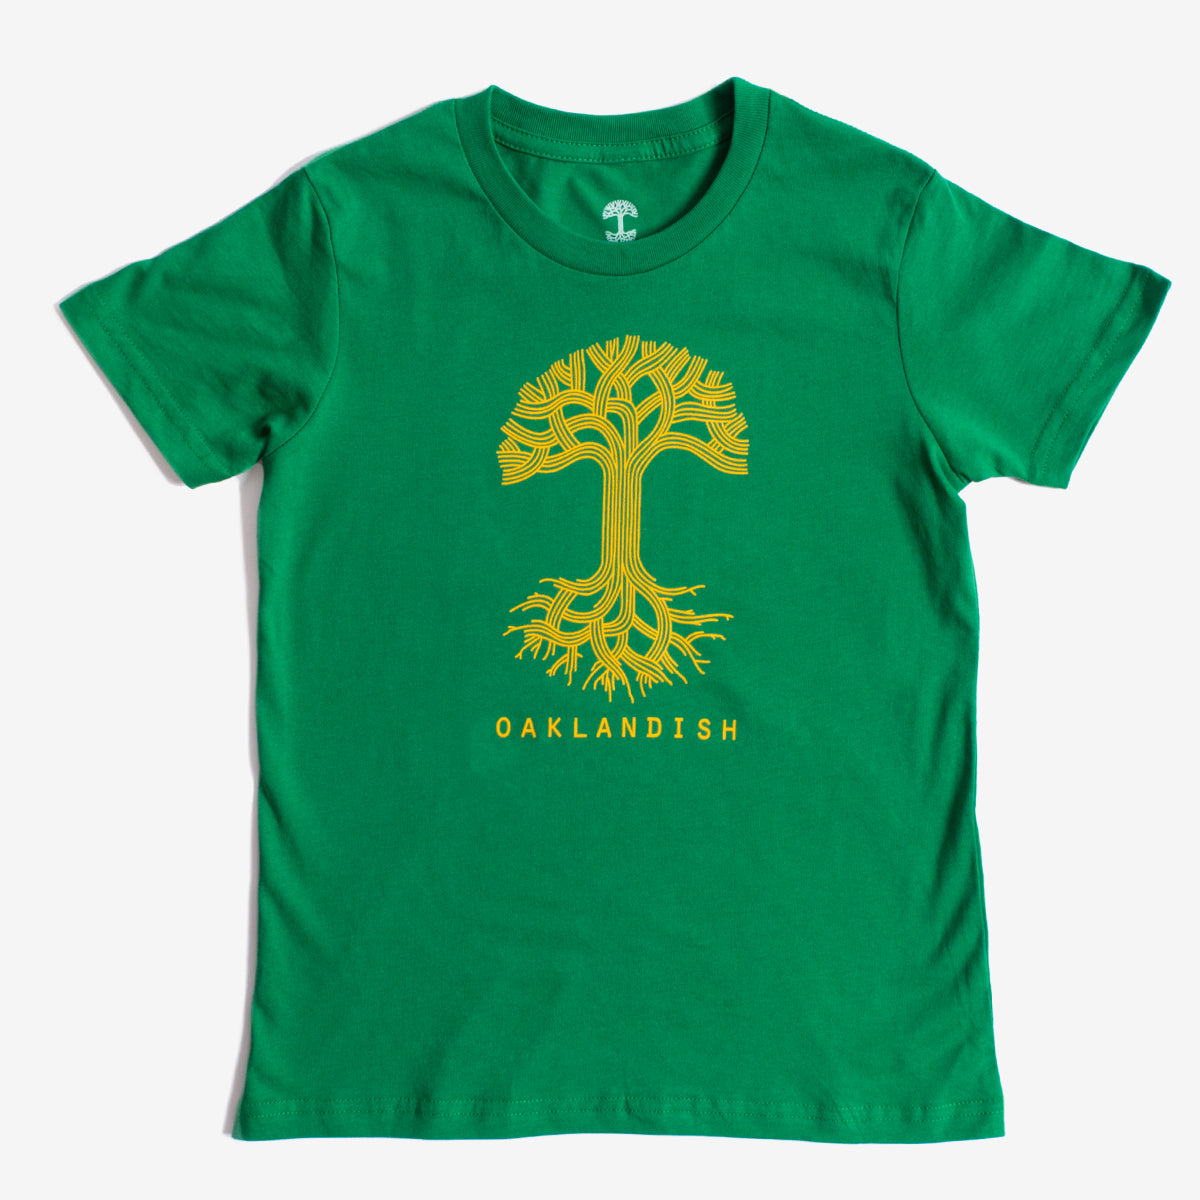 A green youth sized t-shirt with yellow classic Oaklandish tree logo and wordmark. 